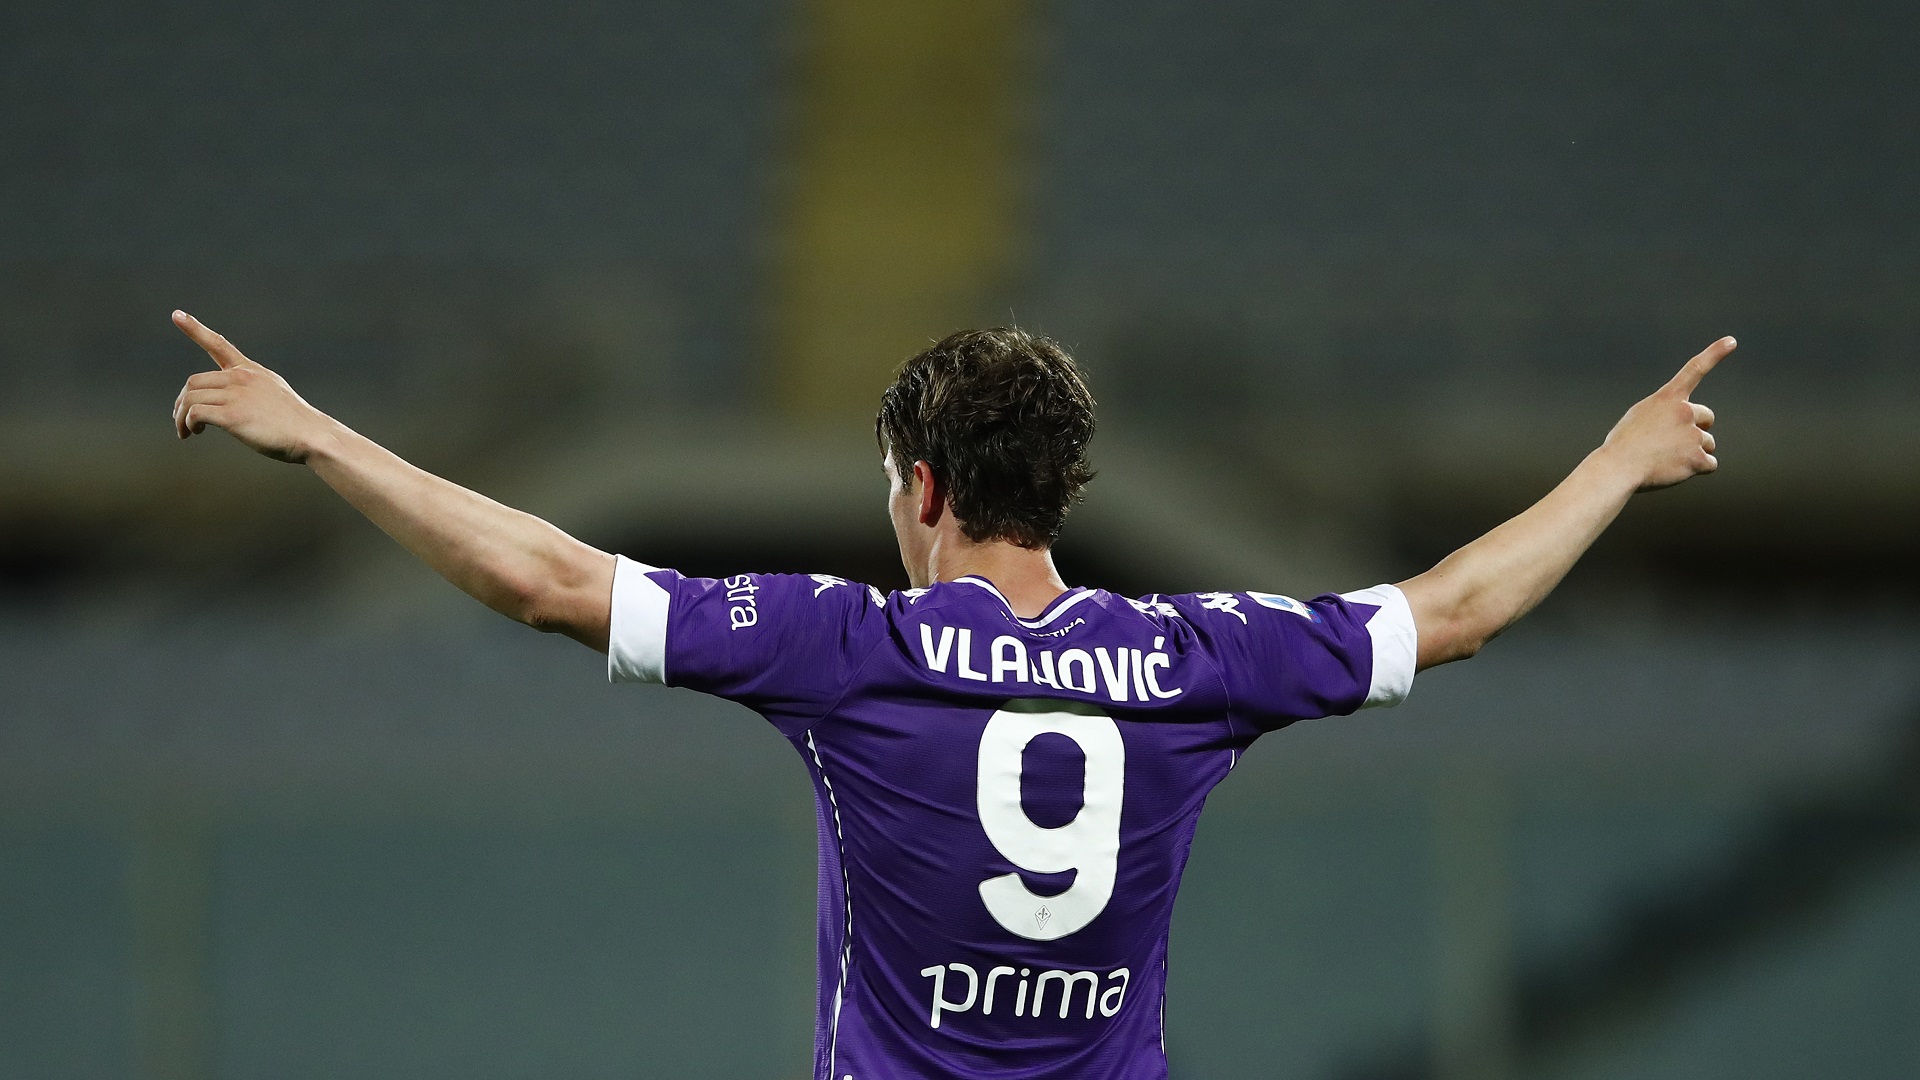 Fiorentina did not want to sell Dusan Vlahovic to Juventus, and they reached out to Real Madrid before accepting their offer.